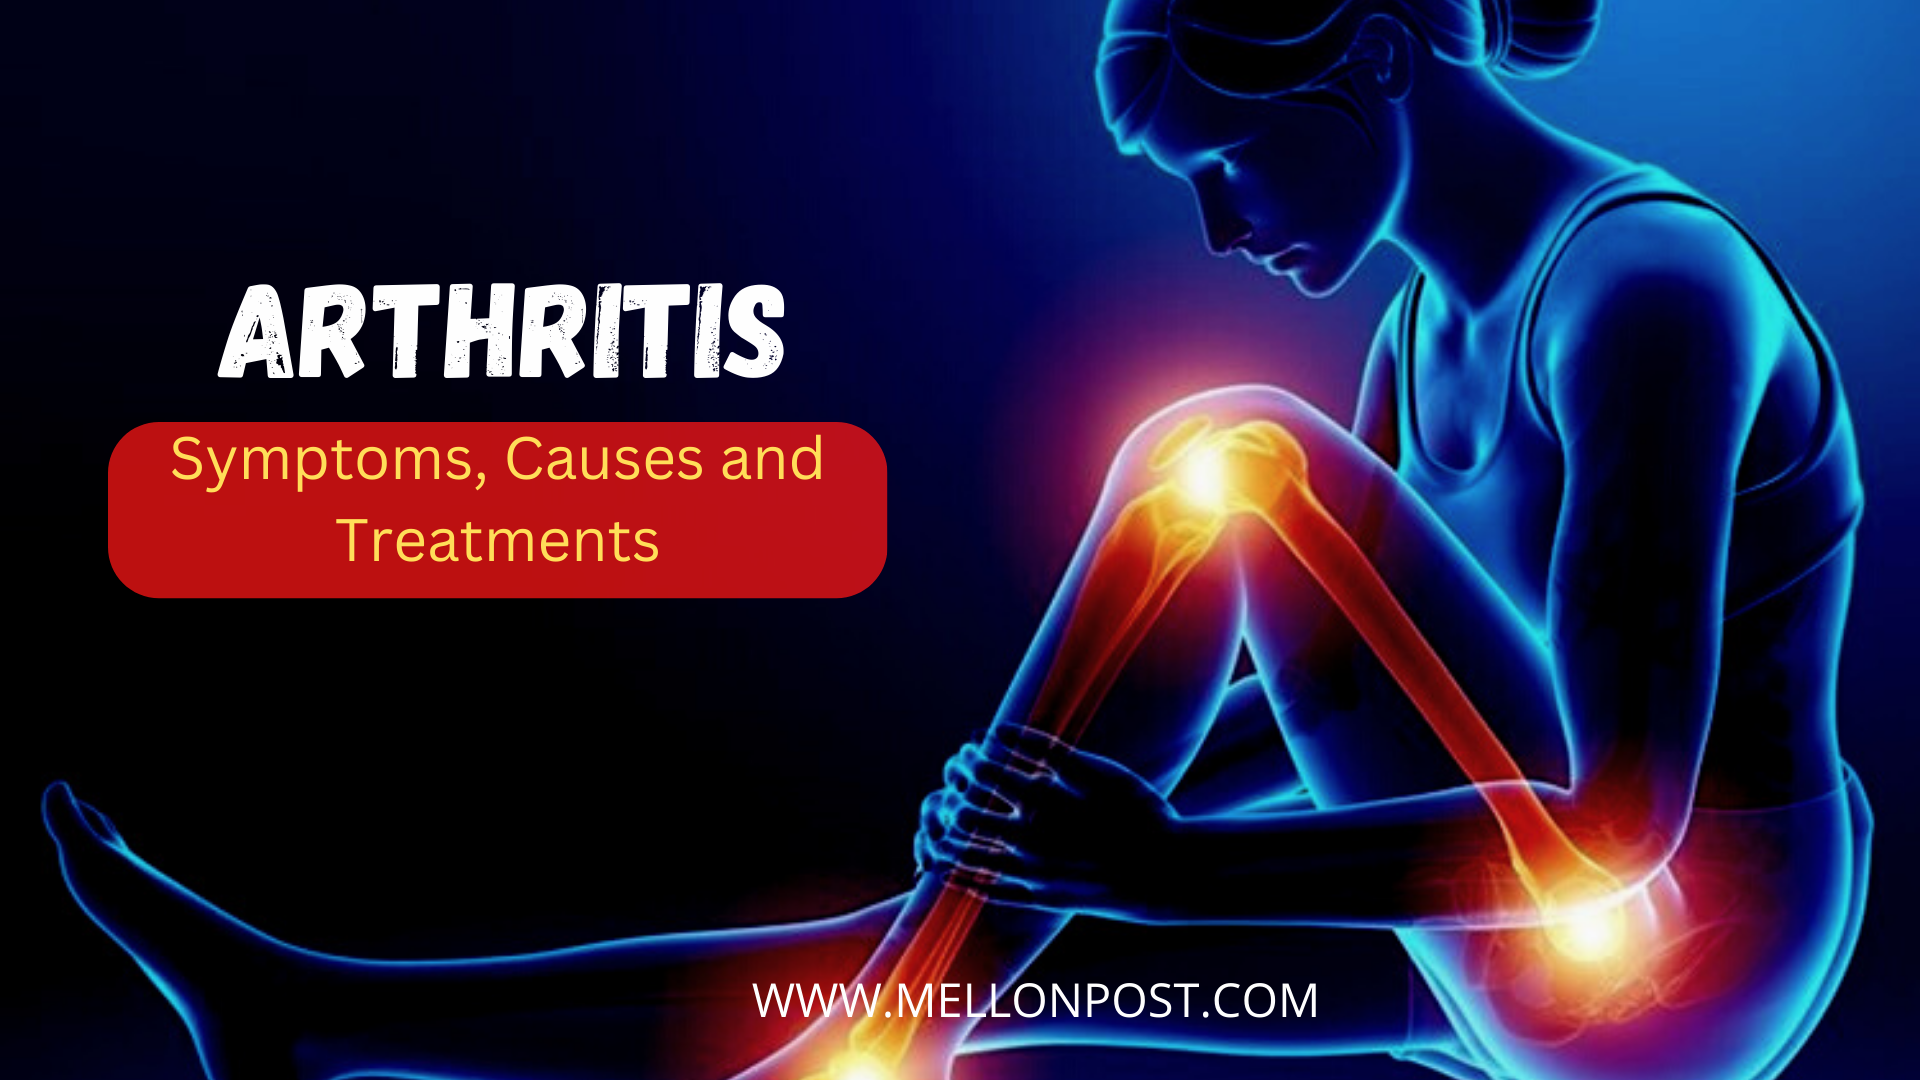 What is Arthritis: Symptoms, Causes, and Treatment